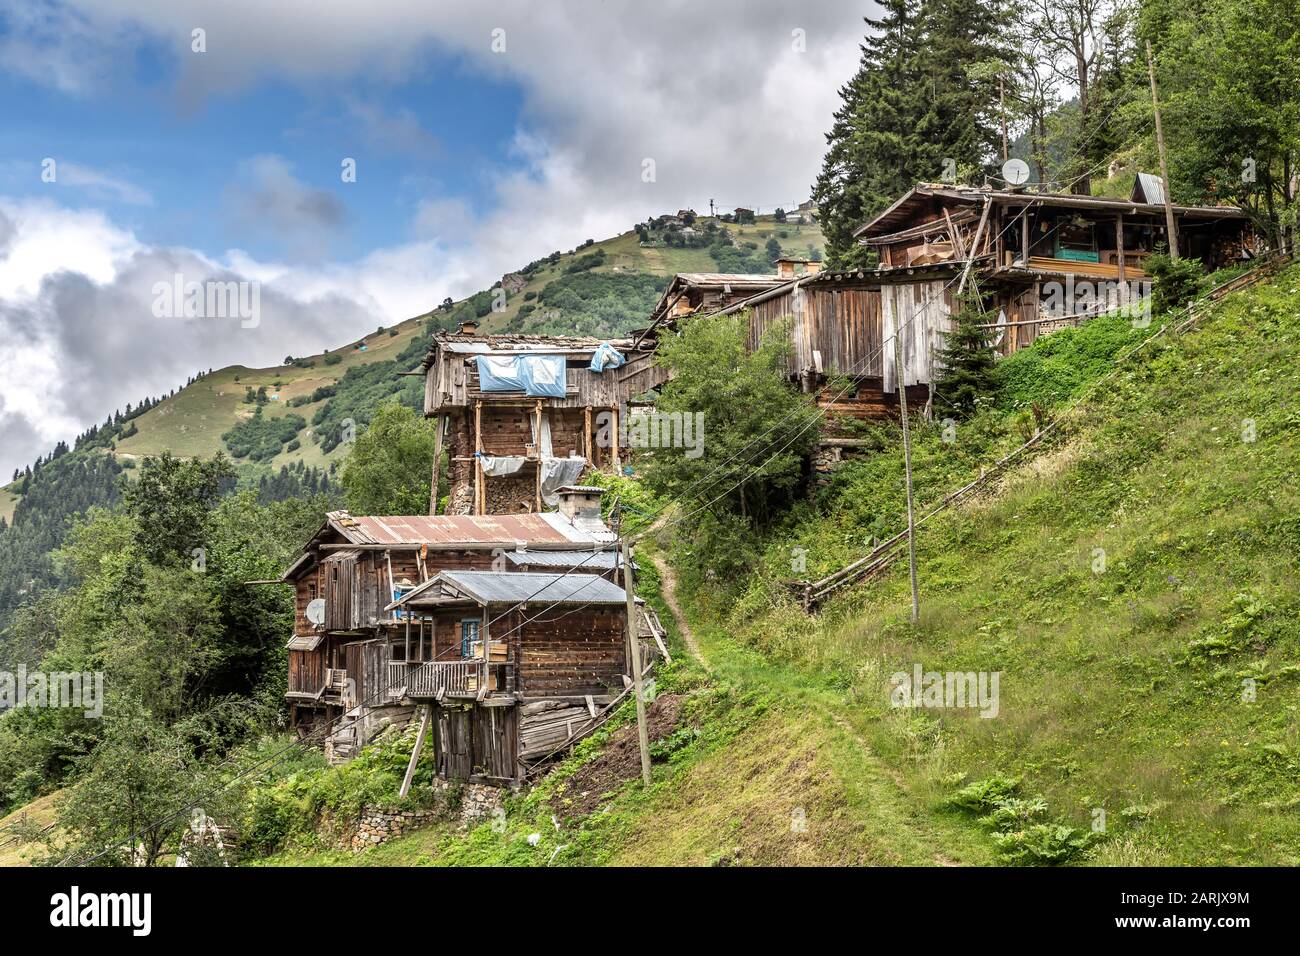 Petran is a mountain village located in Rize İkizdere district at an altitude of 1352 m. Stock Photo